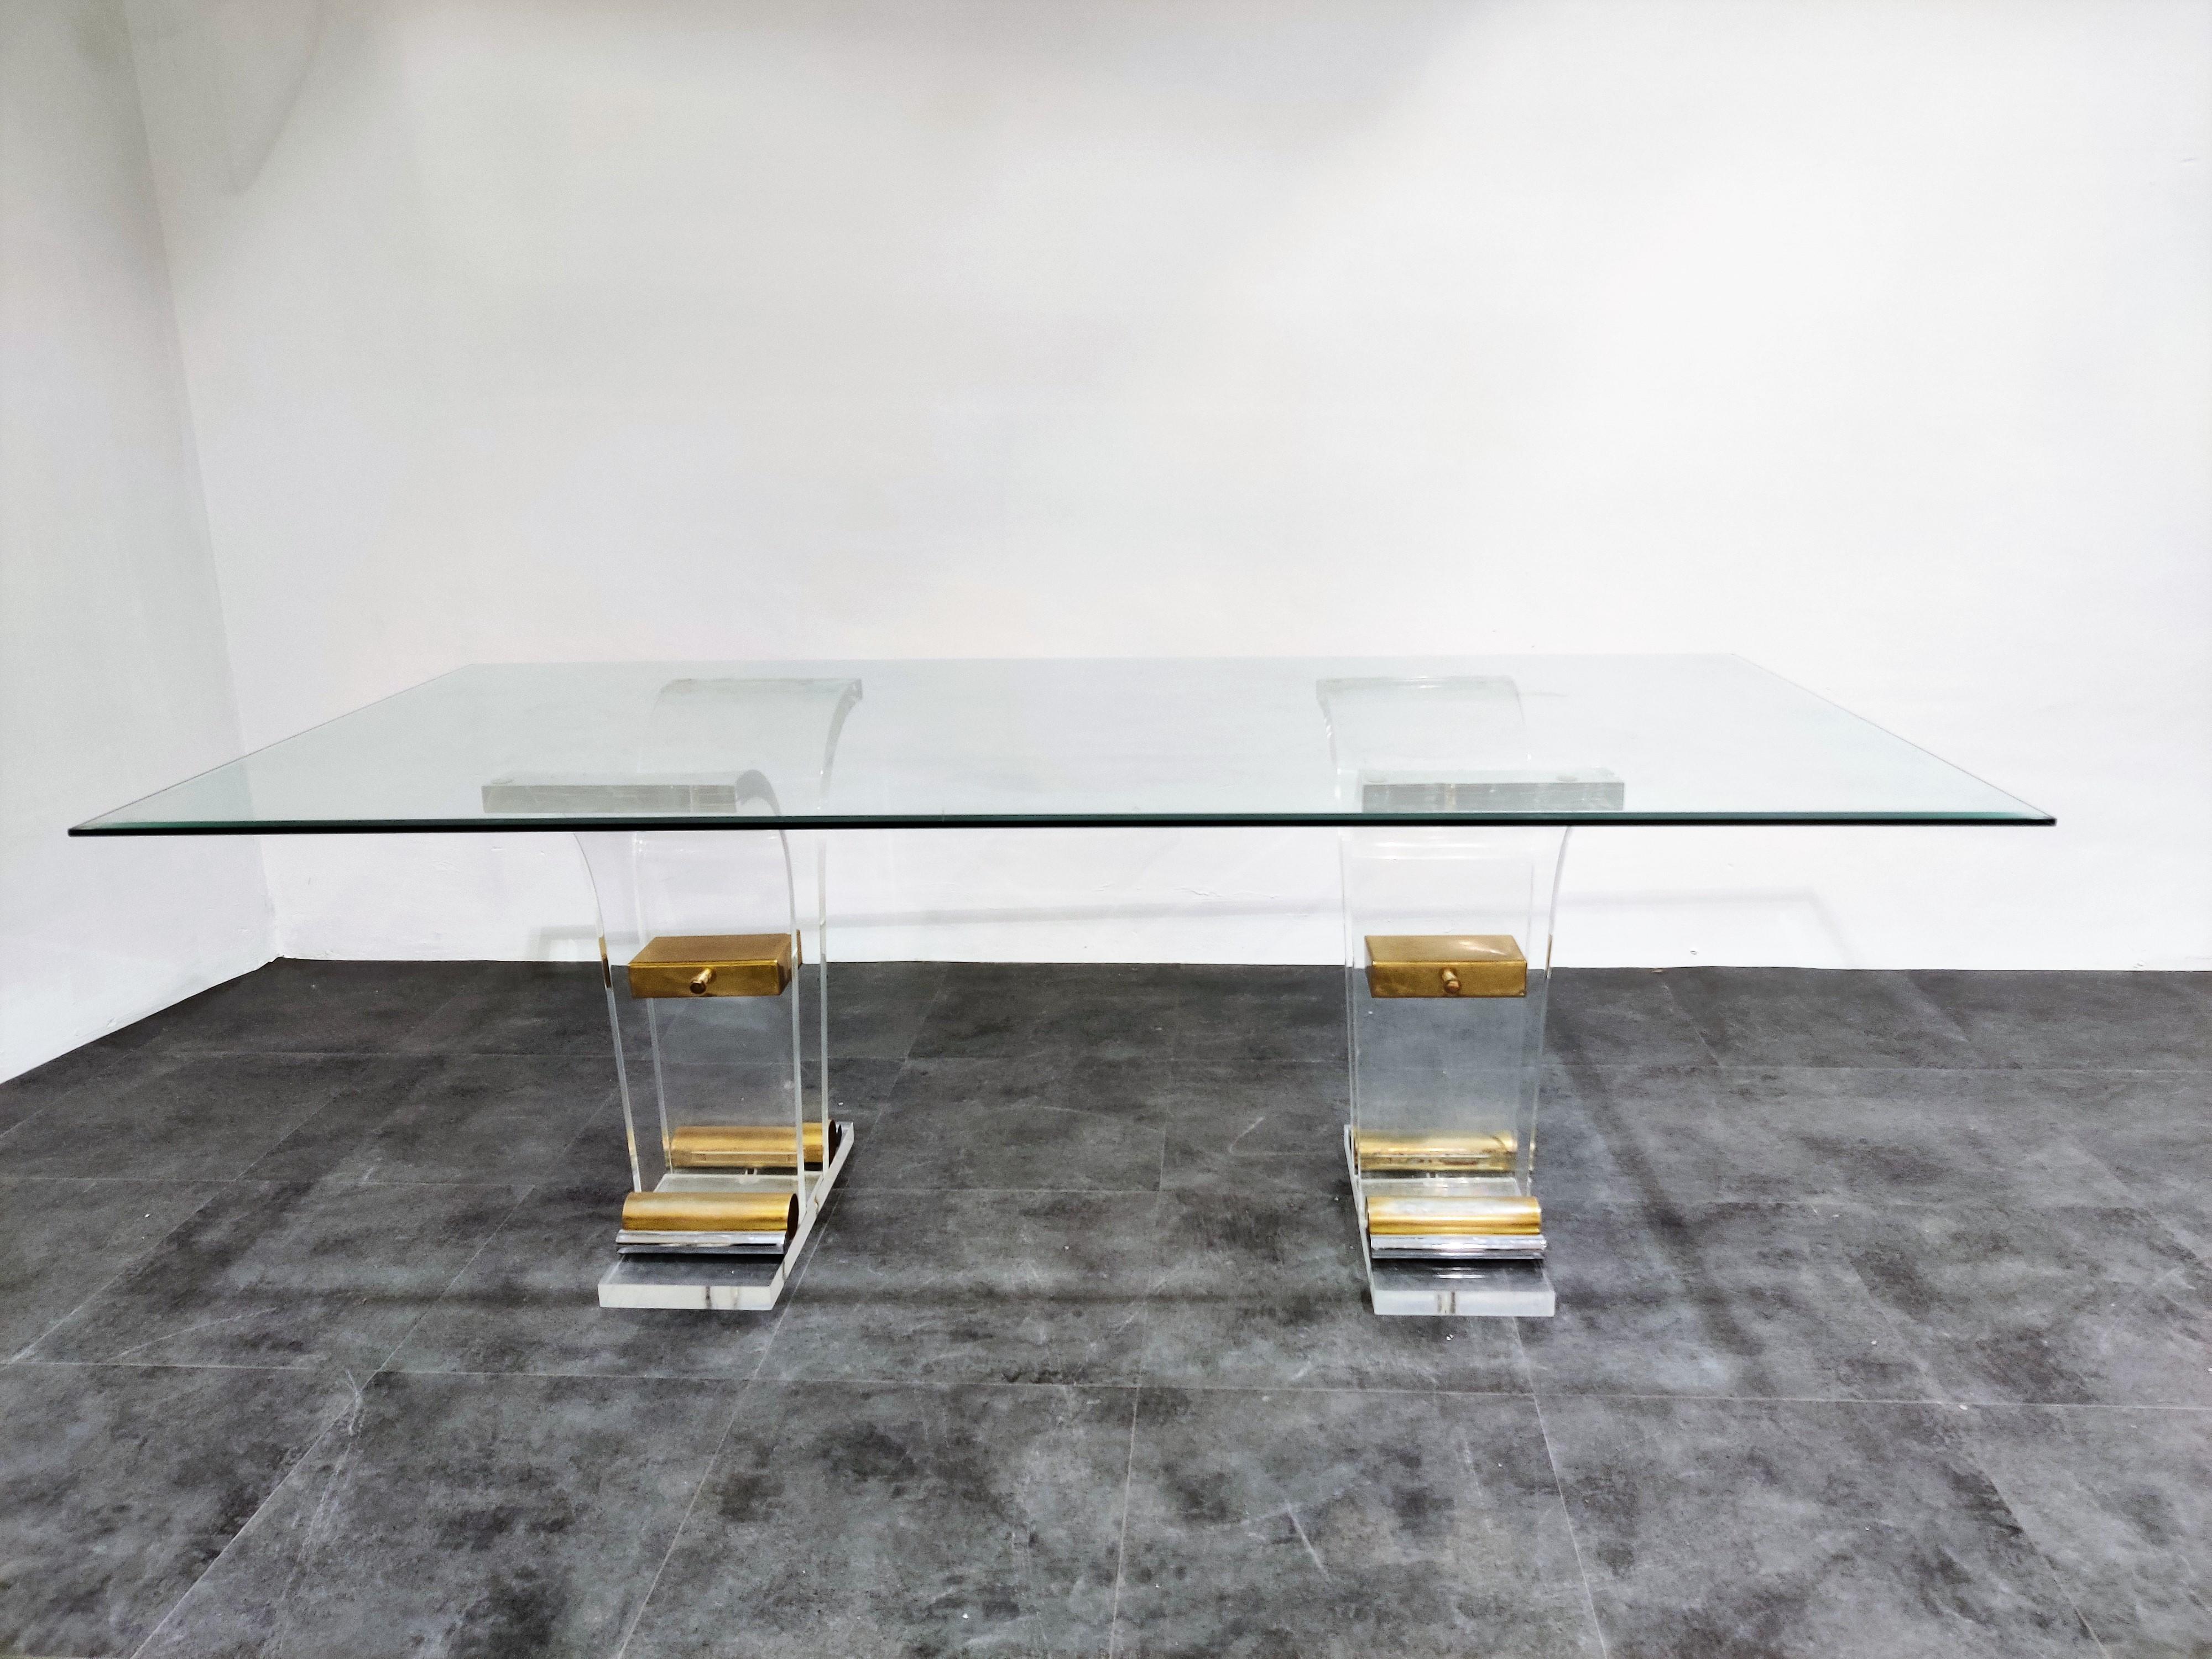 Beautiful Hollywood Regency dining table.

Beveled rectangular glass top.

Brass and Lucite arched bases.

Timeless piece.

The table is in good condition, minor damages to the glass.

1970s - Italy

Measures: Height 72cm/28.34